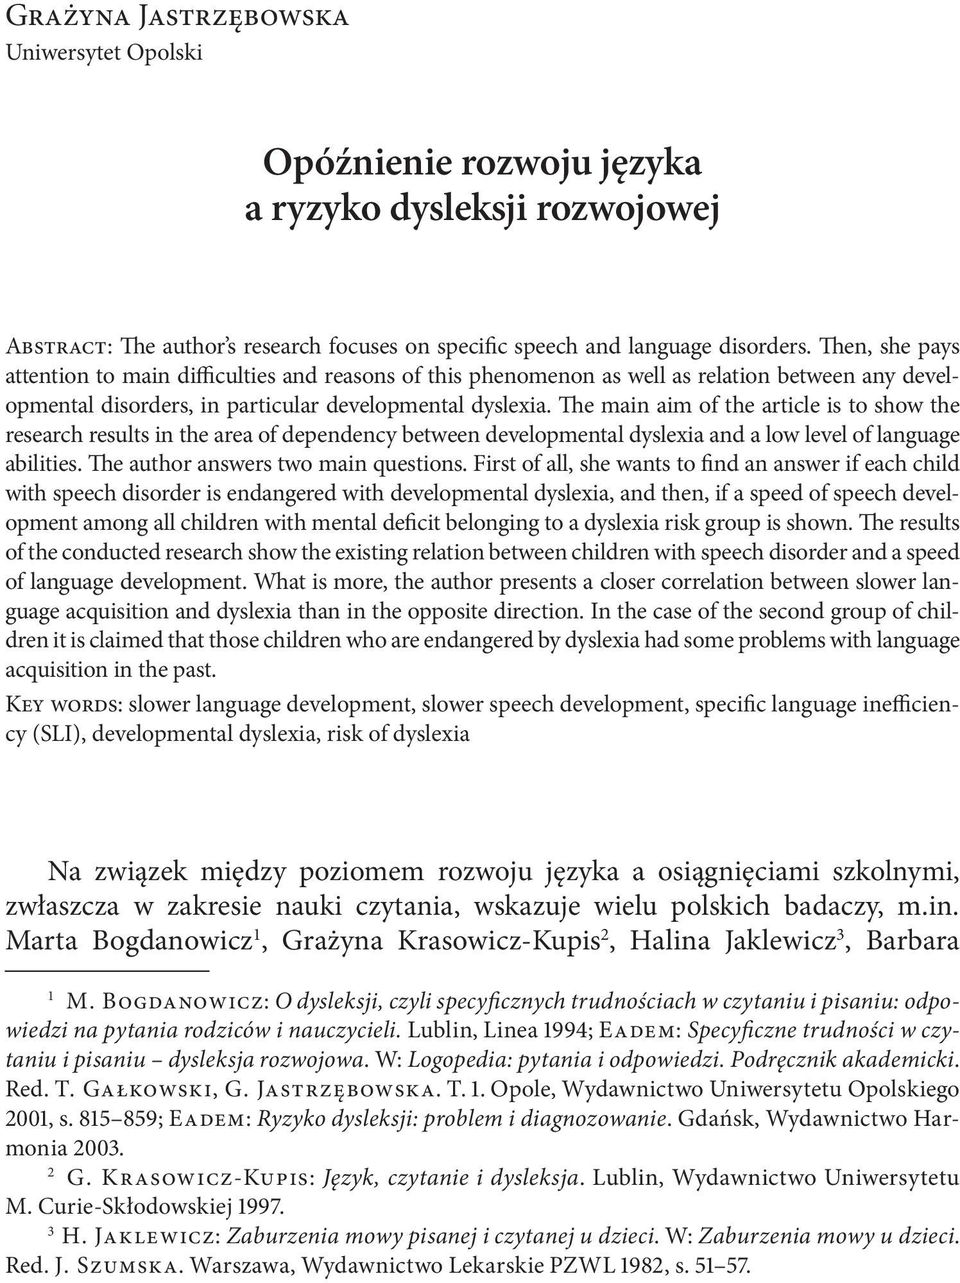 The main aim of the article is to show the research results in the area of dependency between developmental dyslexia and a low level of language abilities. The author answers two main questions.